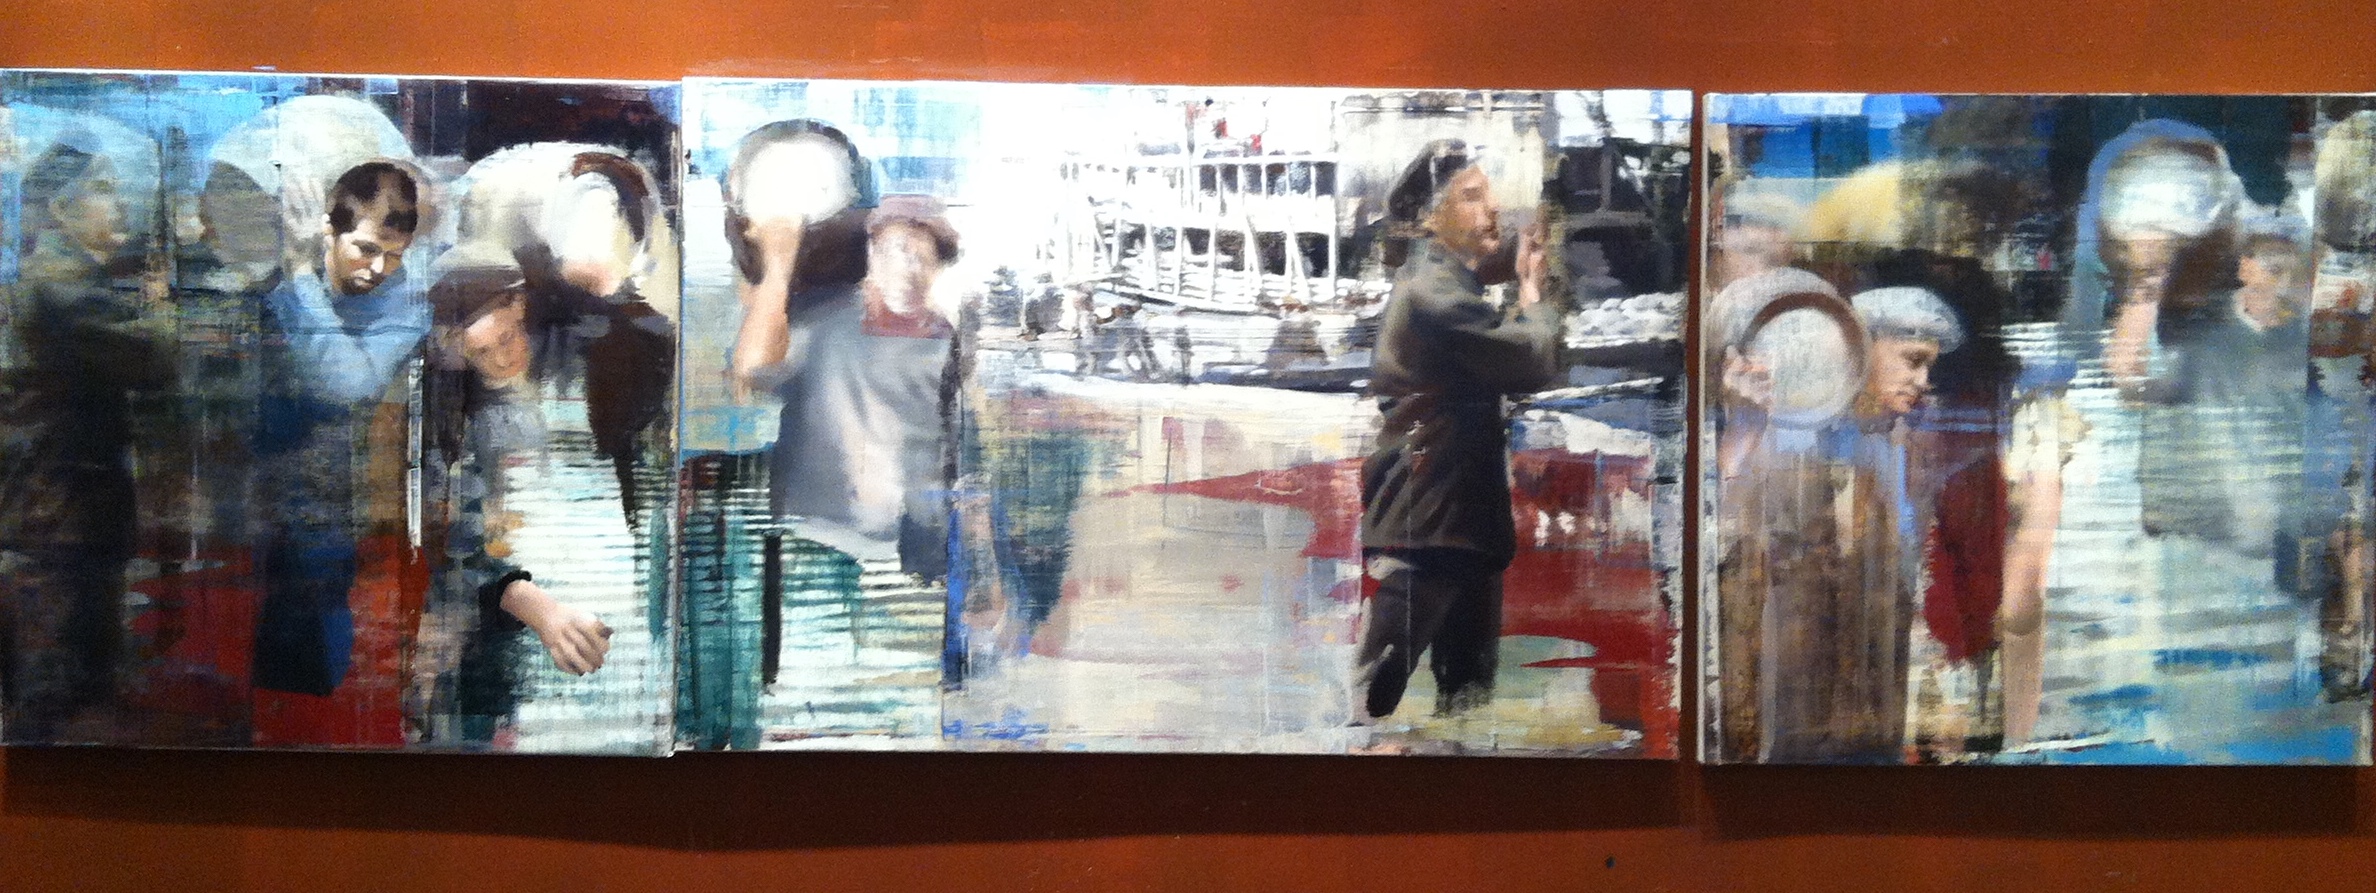 19. Moving the Barrels, Oil on Linen on Panel, 2013, 48” X 168”